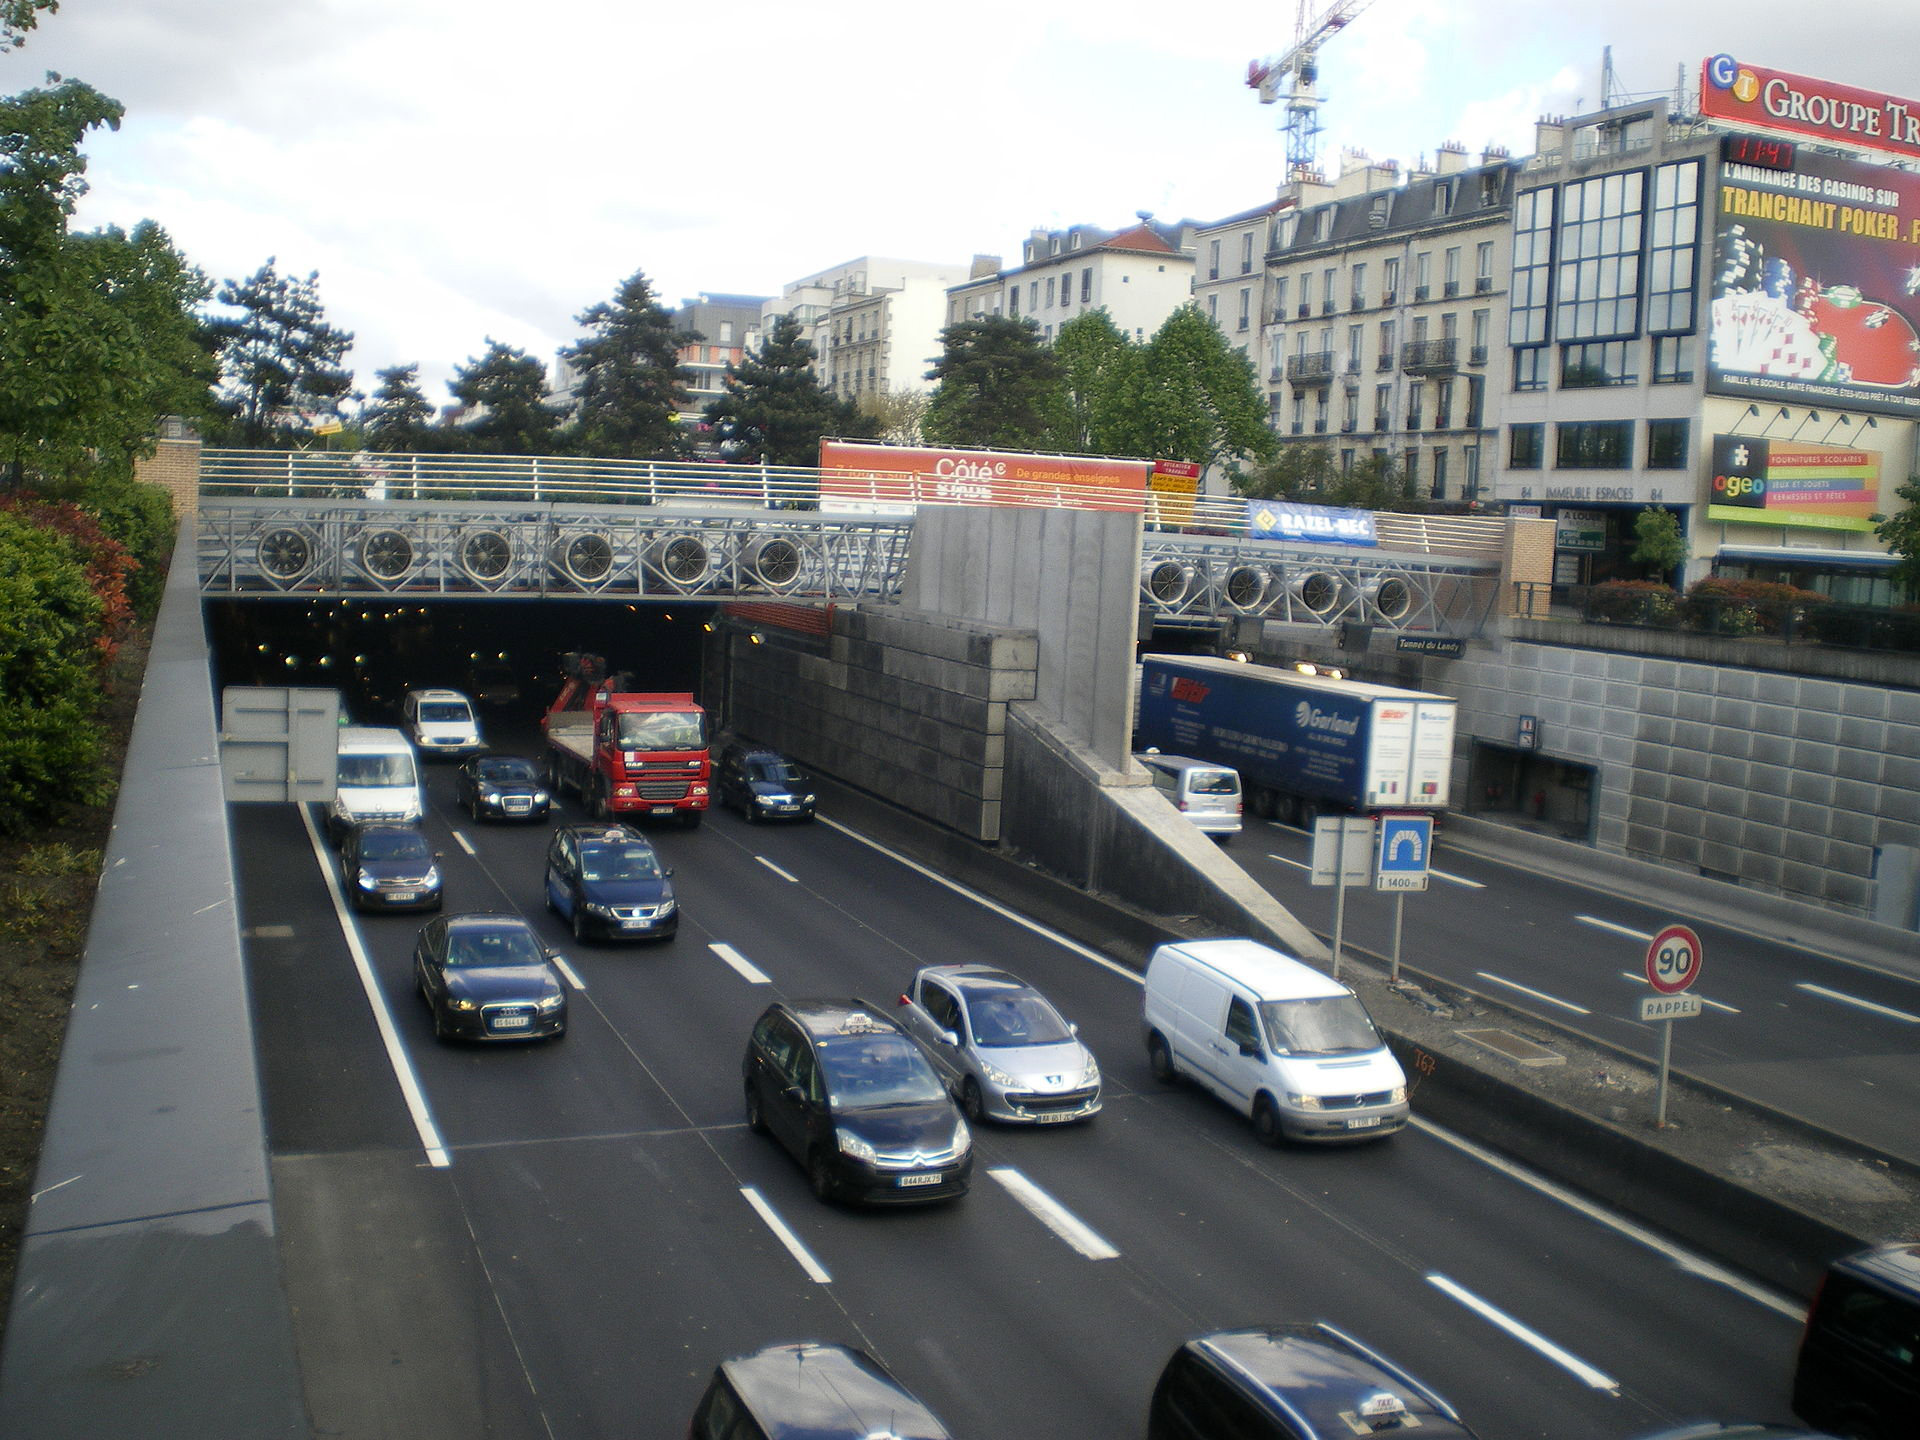 South portal of the Tunnel du Landy in Paris. Copyrighted photo by Akiry, licensed under the Creative Commons Attribution-Share Alike 3.0 Unported license.